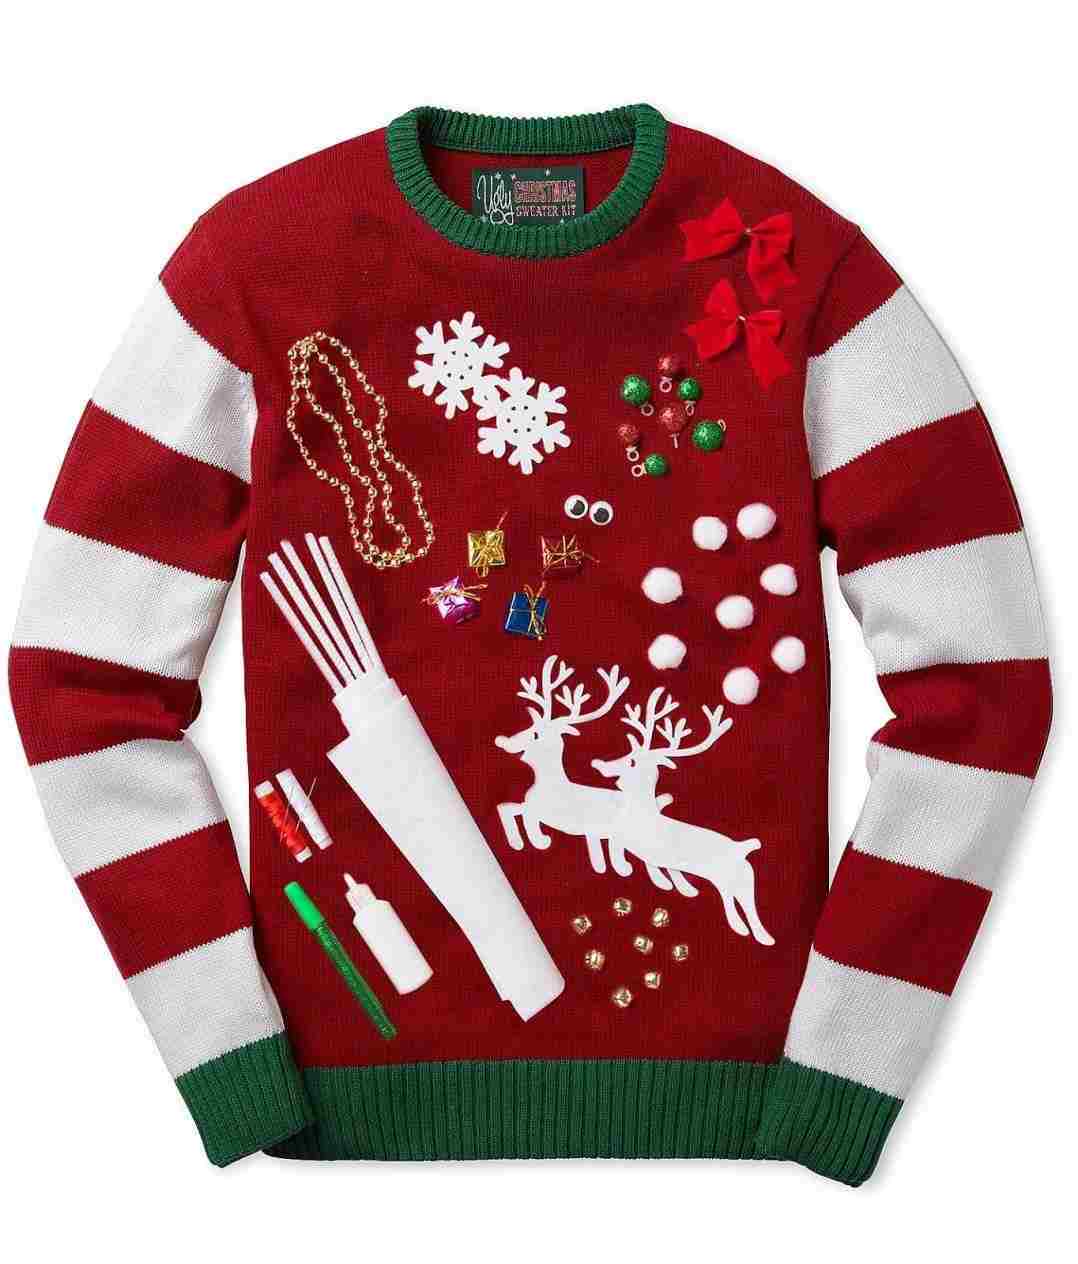 Download Ugly Sweater Vector at GetDrawings.com | Free for personal ...